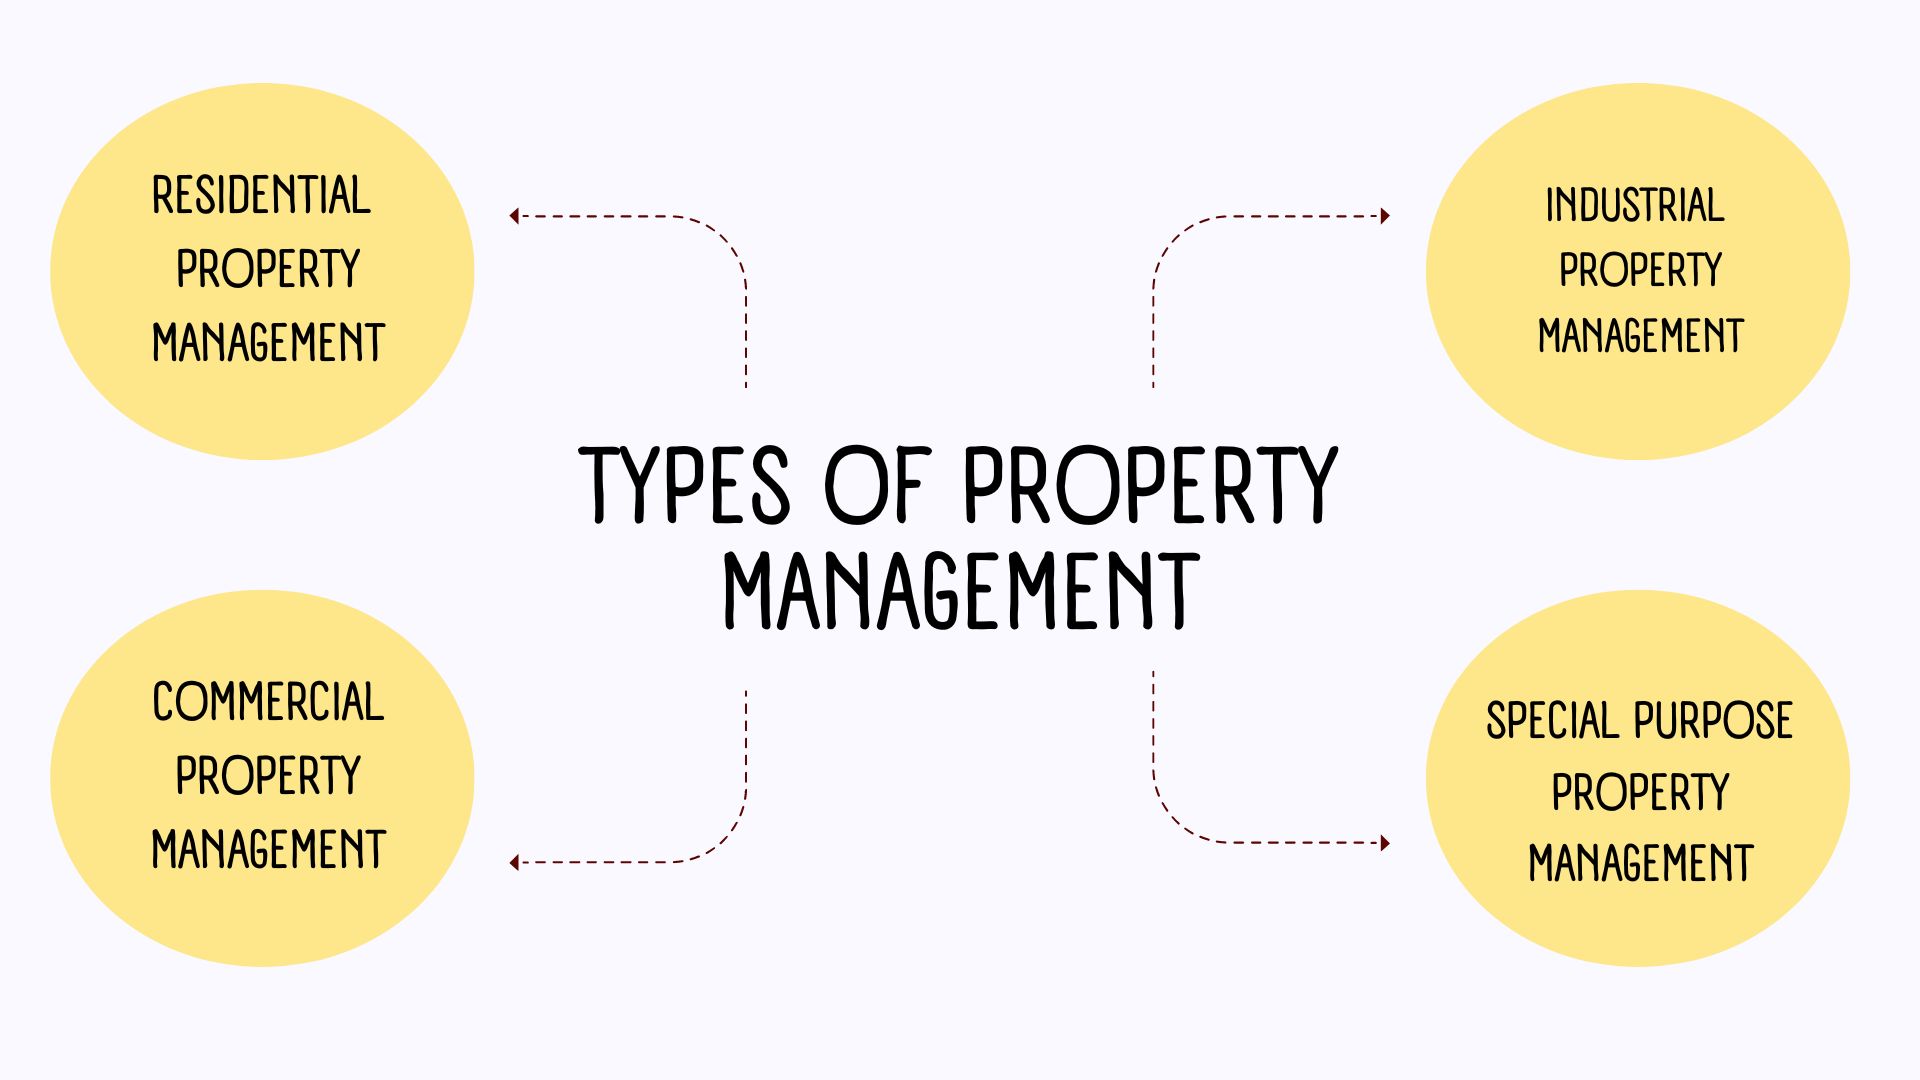 Types of property management